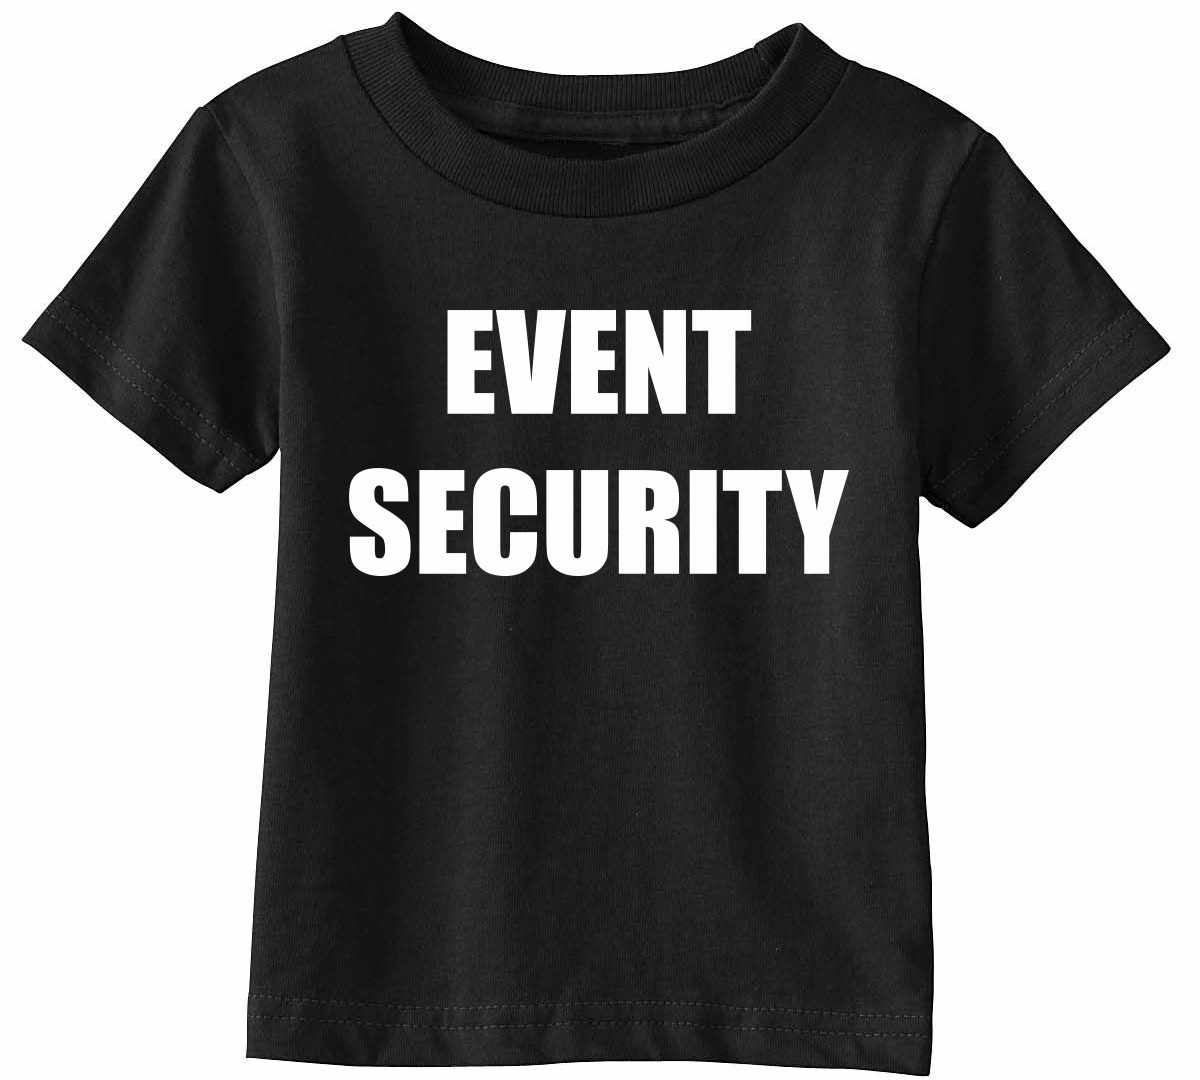 EVENT SECURITY Infant/Toddler  (#408-7)